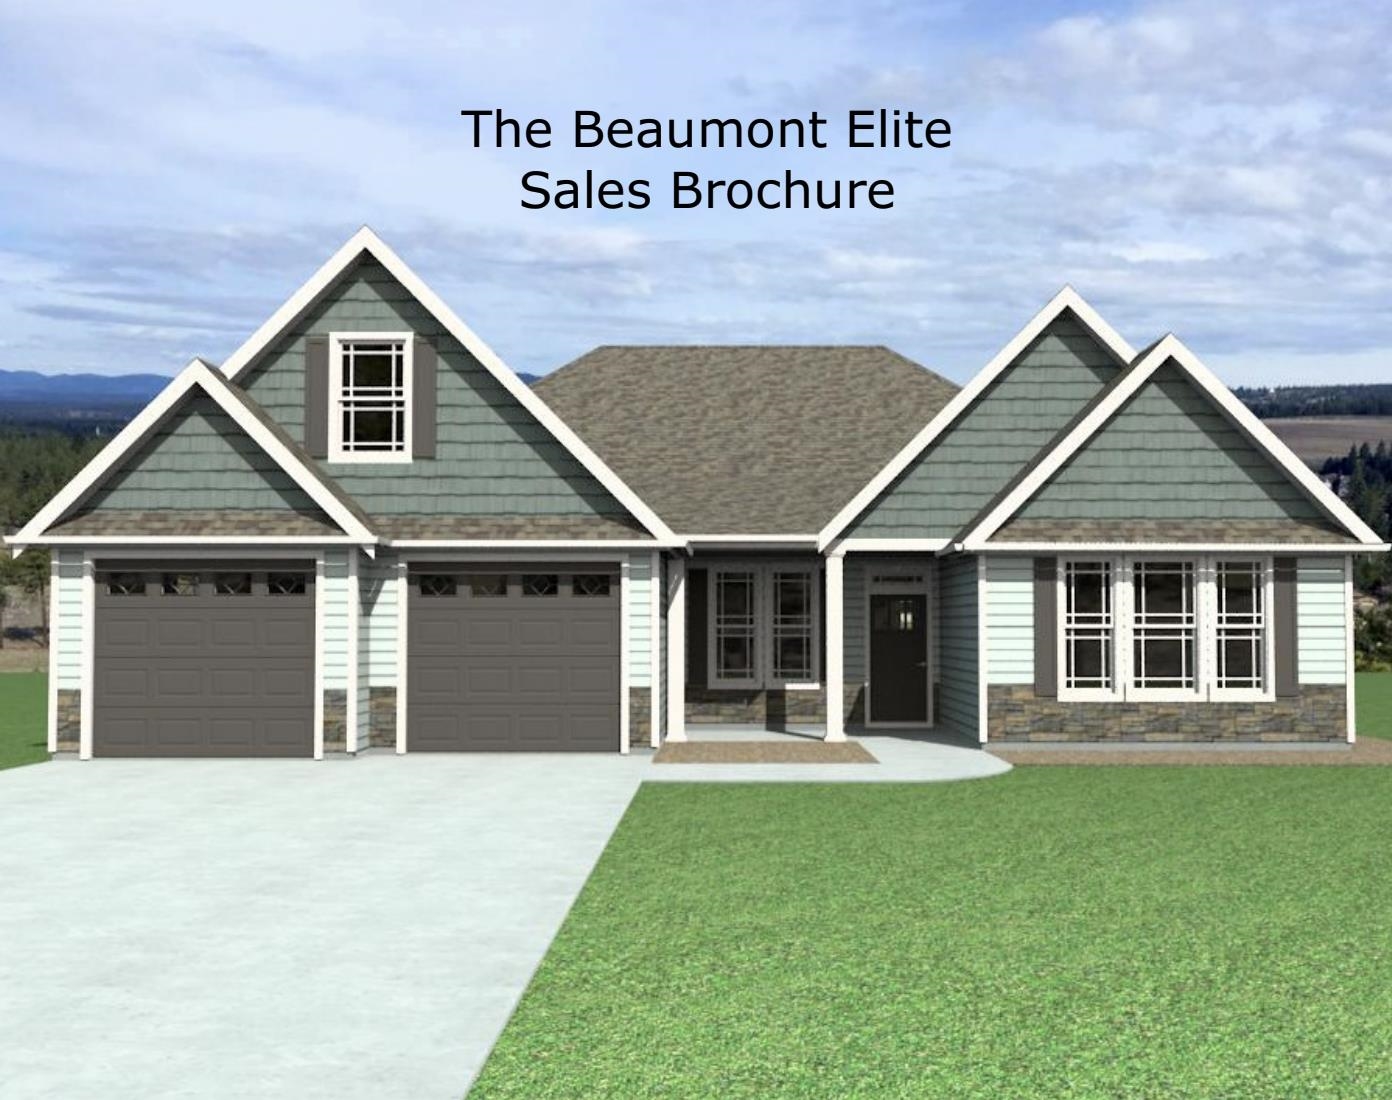 The BEAUMONT ELITE floor plan is an open concept home featuring 3 bedrooms, 2.5 bathrooms, office/study plus a sunroom! Walk-in pantry, and large kitchen with extended cabinets, island and nook. Quartz counters throughout. Standard features in this home include concrete plank and stone exterior, architectural shingles, soffit exterior lighting, 11-foot ceilings in LR & Kitchen, crown molding with rope lighting in the primary bedroom and living room. 12"x24" ceramic tile floors in baths & laundry. Large, tiled shower with accent in the primary bathroom, electric water heater, large covered back deck and more! Request the finish list for this beautiful home!   Preferred lender & attorney closing cost incentives!!! Lot 13